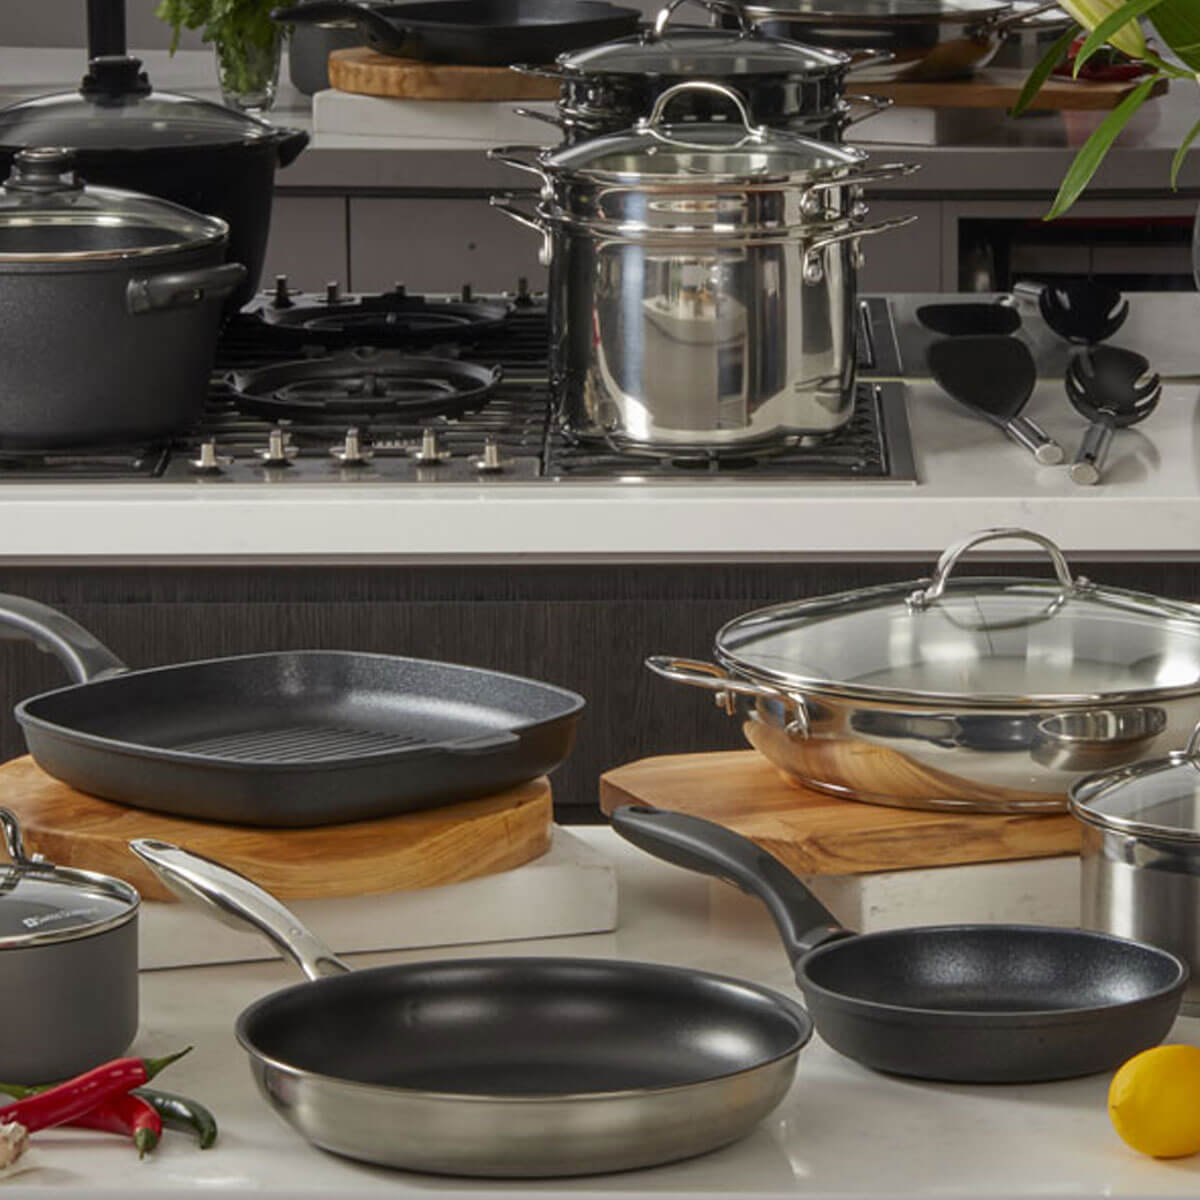 set of cookware on counter and stove top